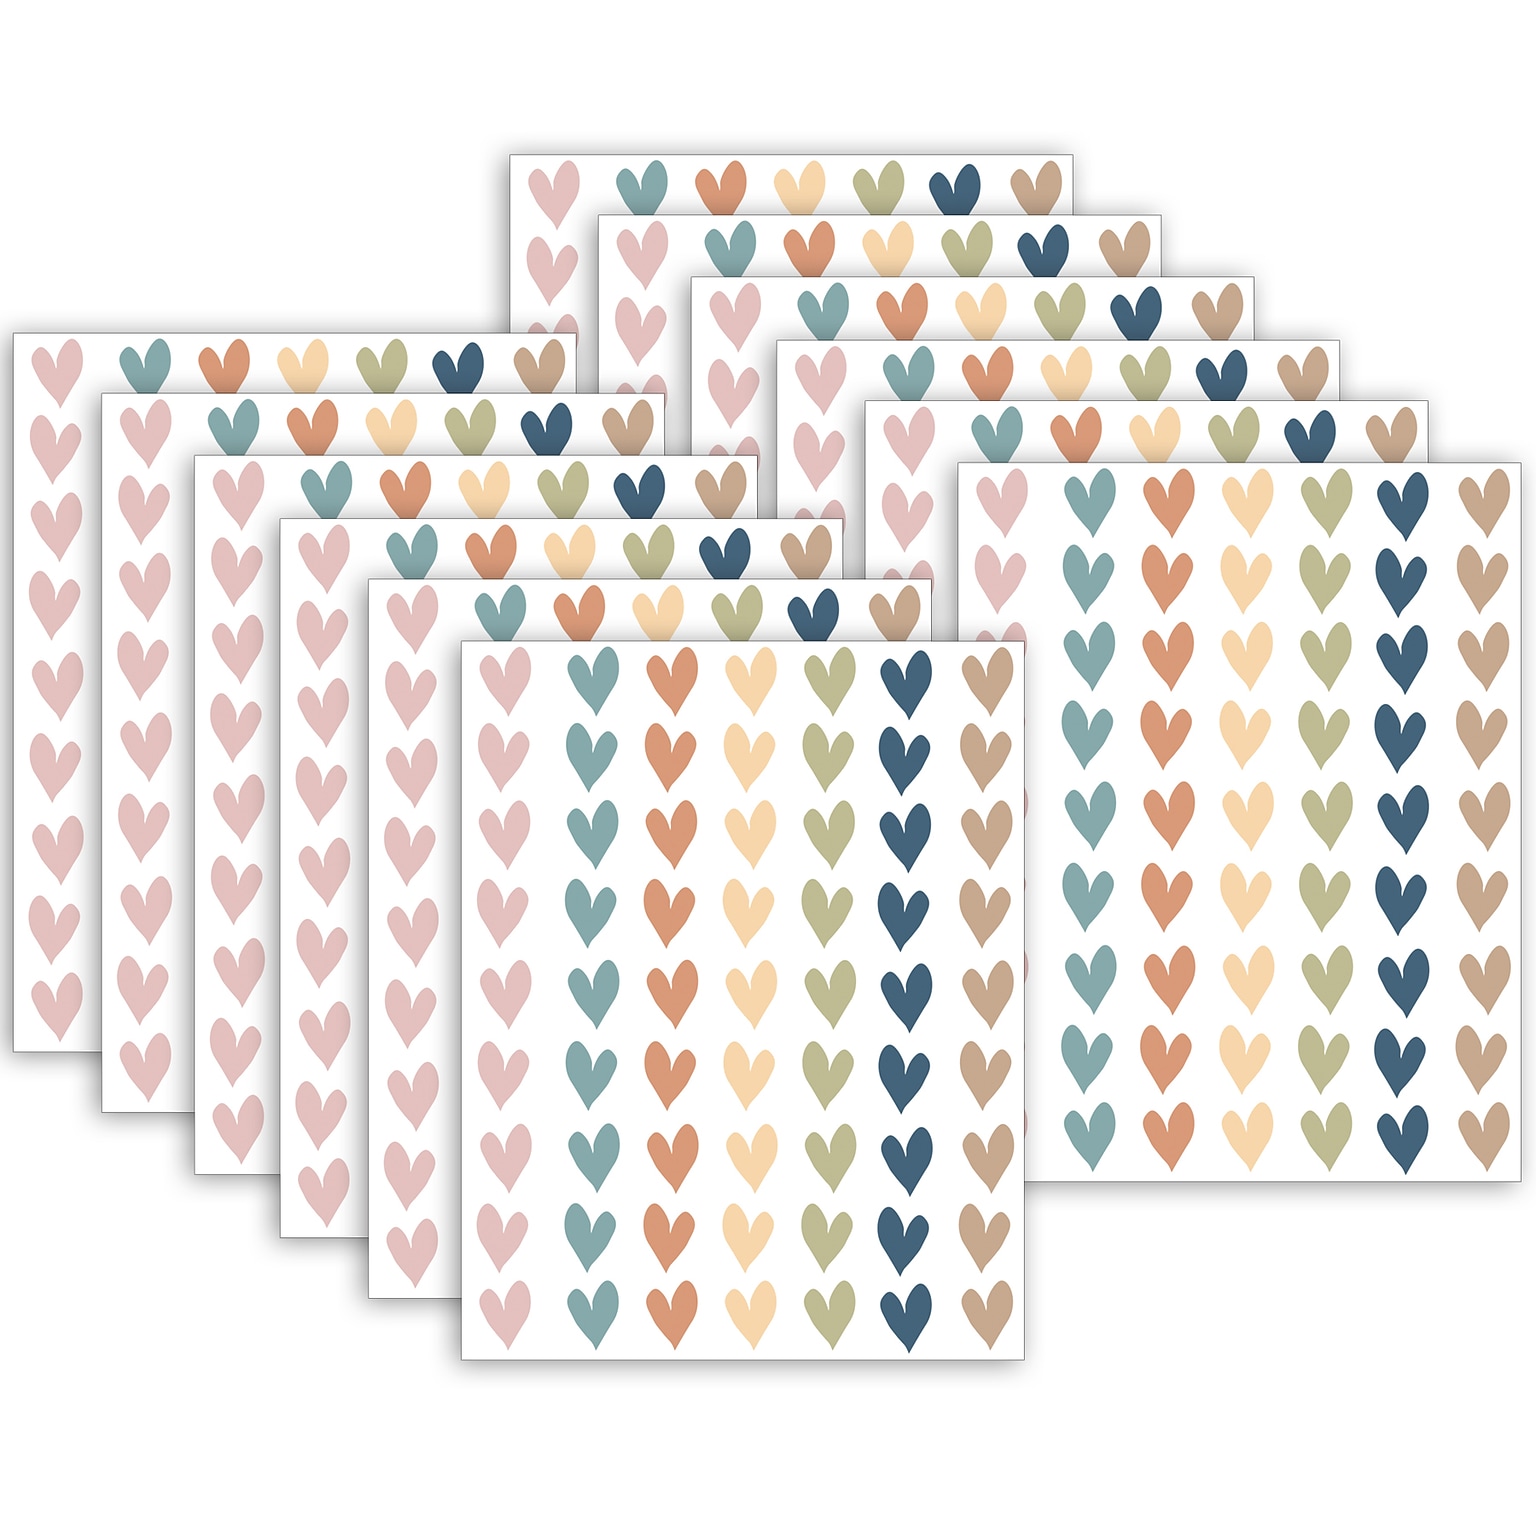 Teacher Created Resources® Everyone is Welcome Hearts Mini Stickers, Assorted Colors, 378 Per Pack, 12 Packs (TCR7140-12)